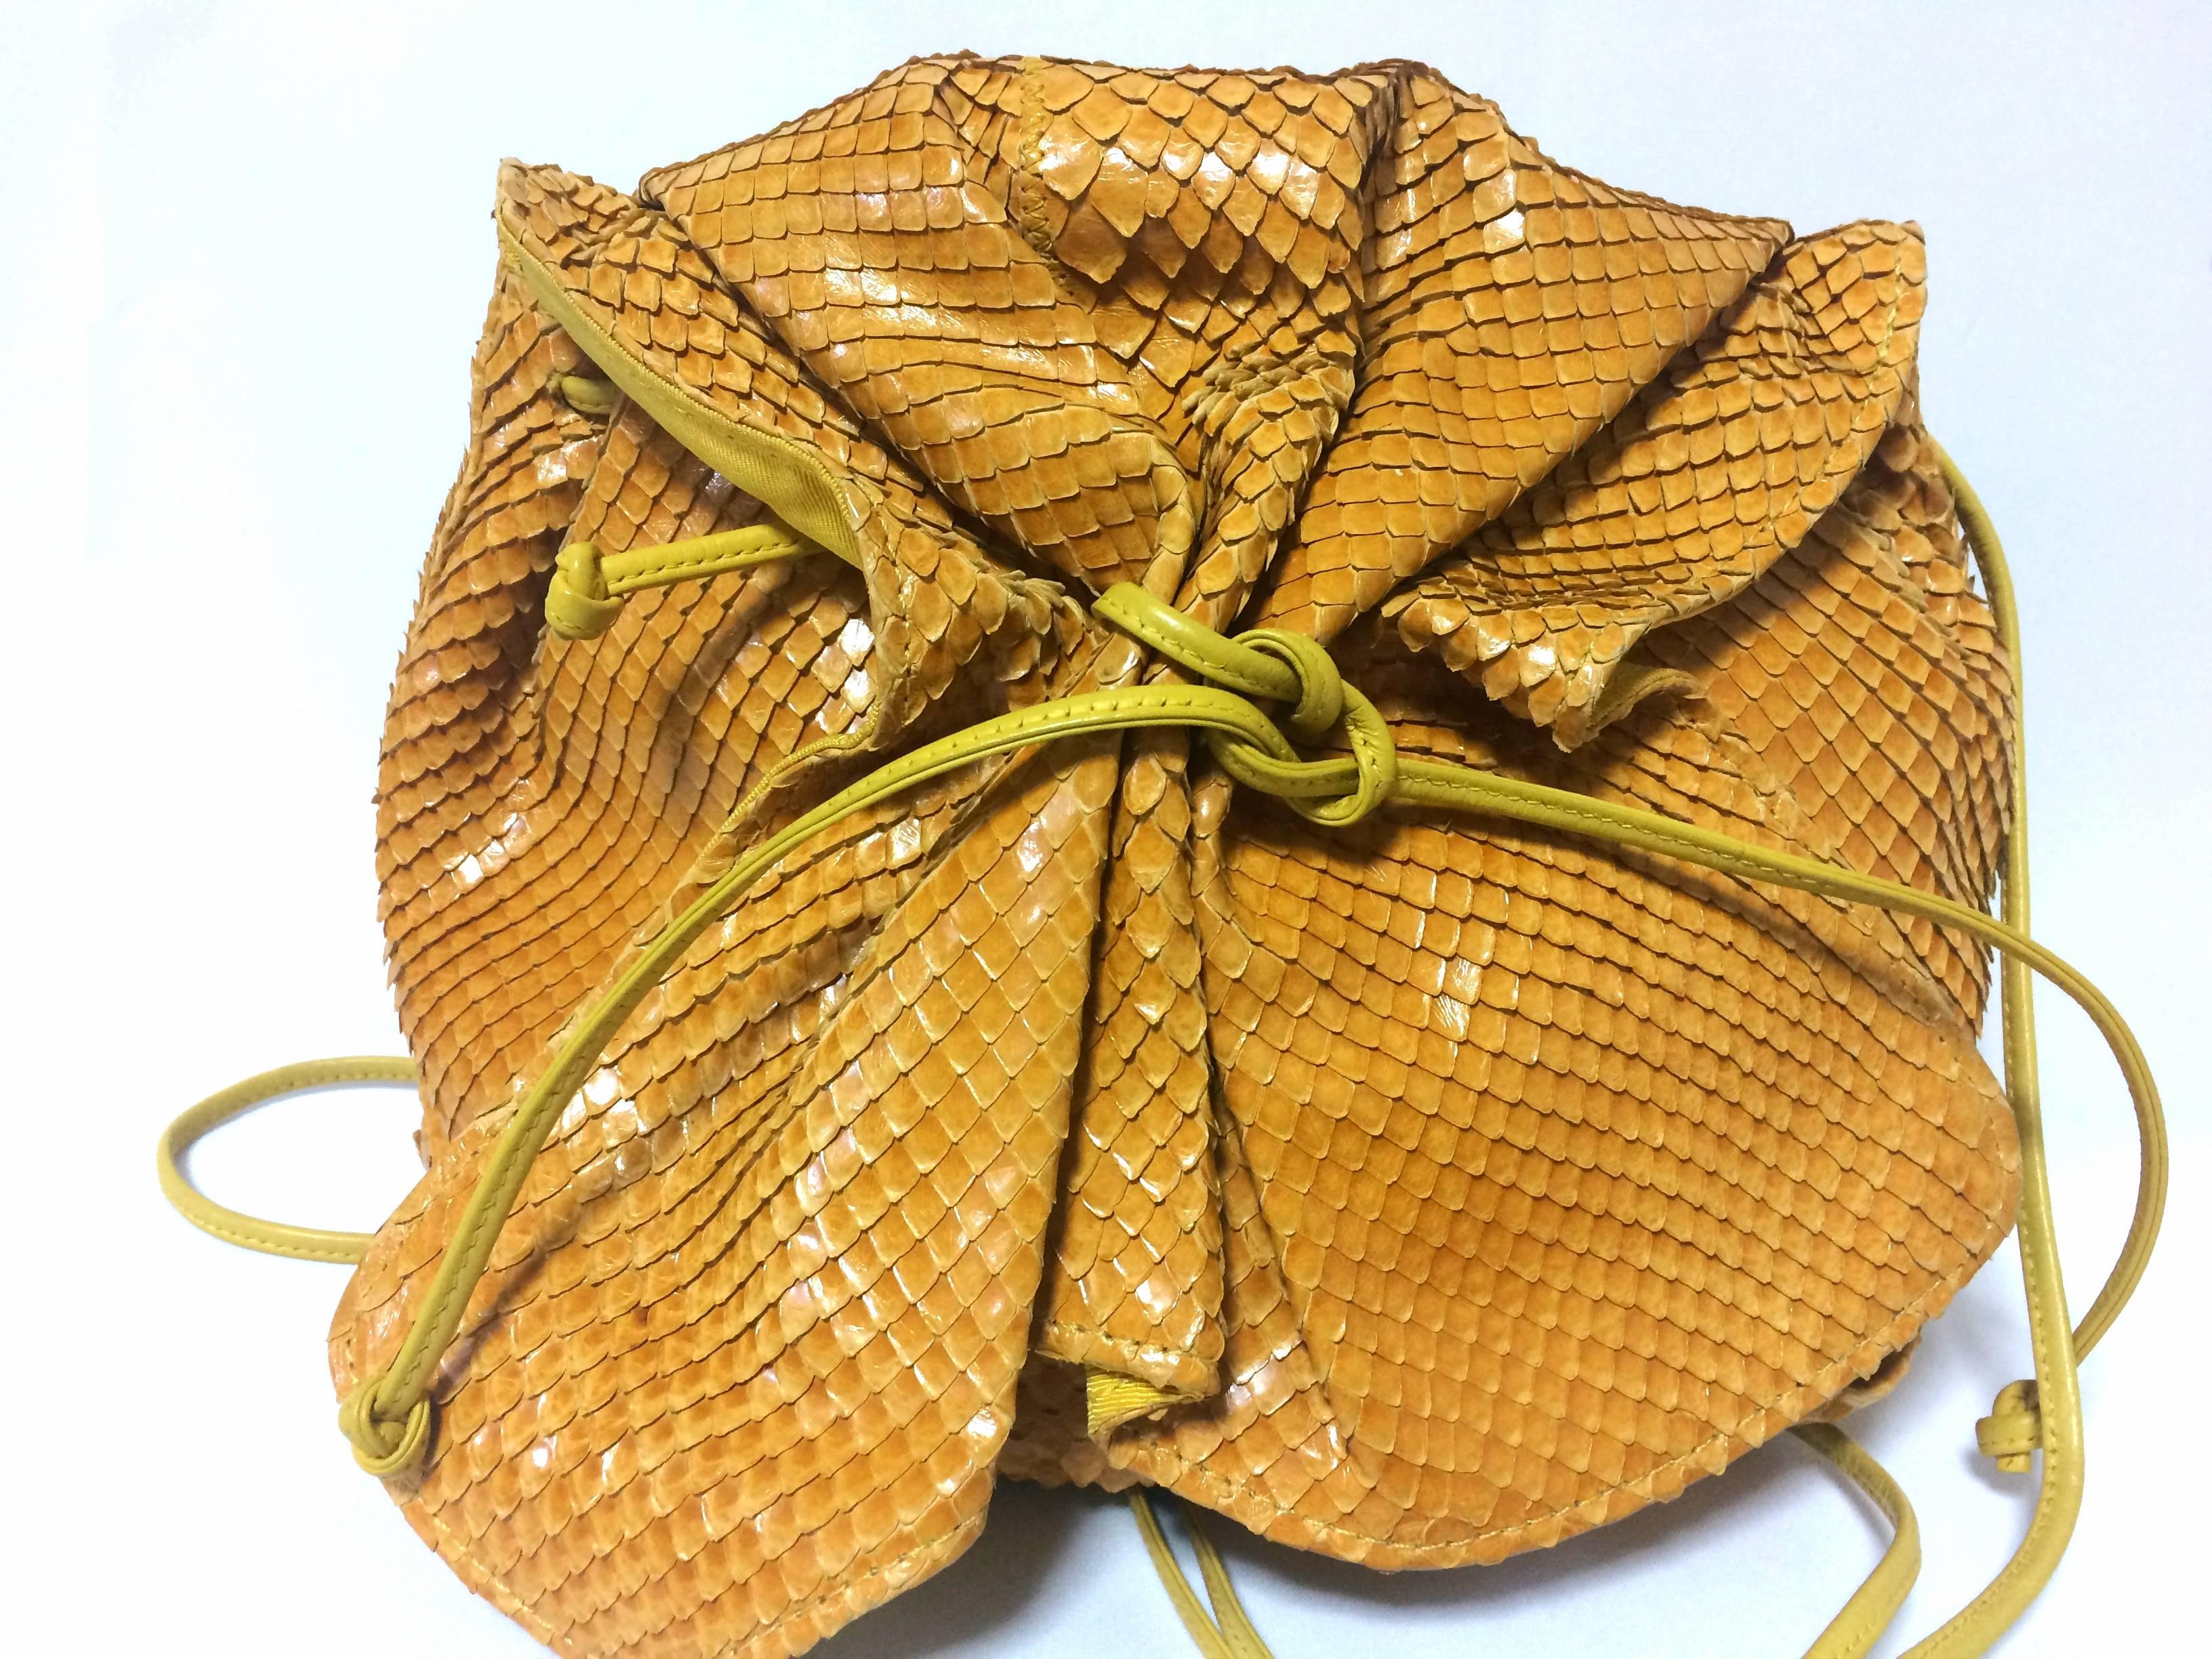 1990s. Vintage Carlos Falchi genuine yellow snakeskin shoulder bag in unique round form. Can be pouch too.

Introducing a cute and adorable design and shape pouch shoulder bag from Carlos Falchi back in the 90's. Made out of genuine